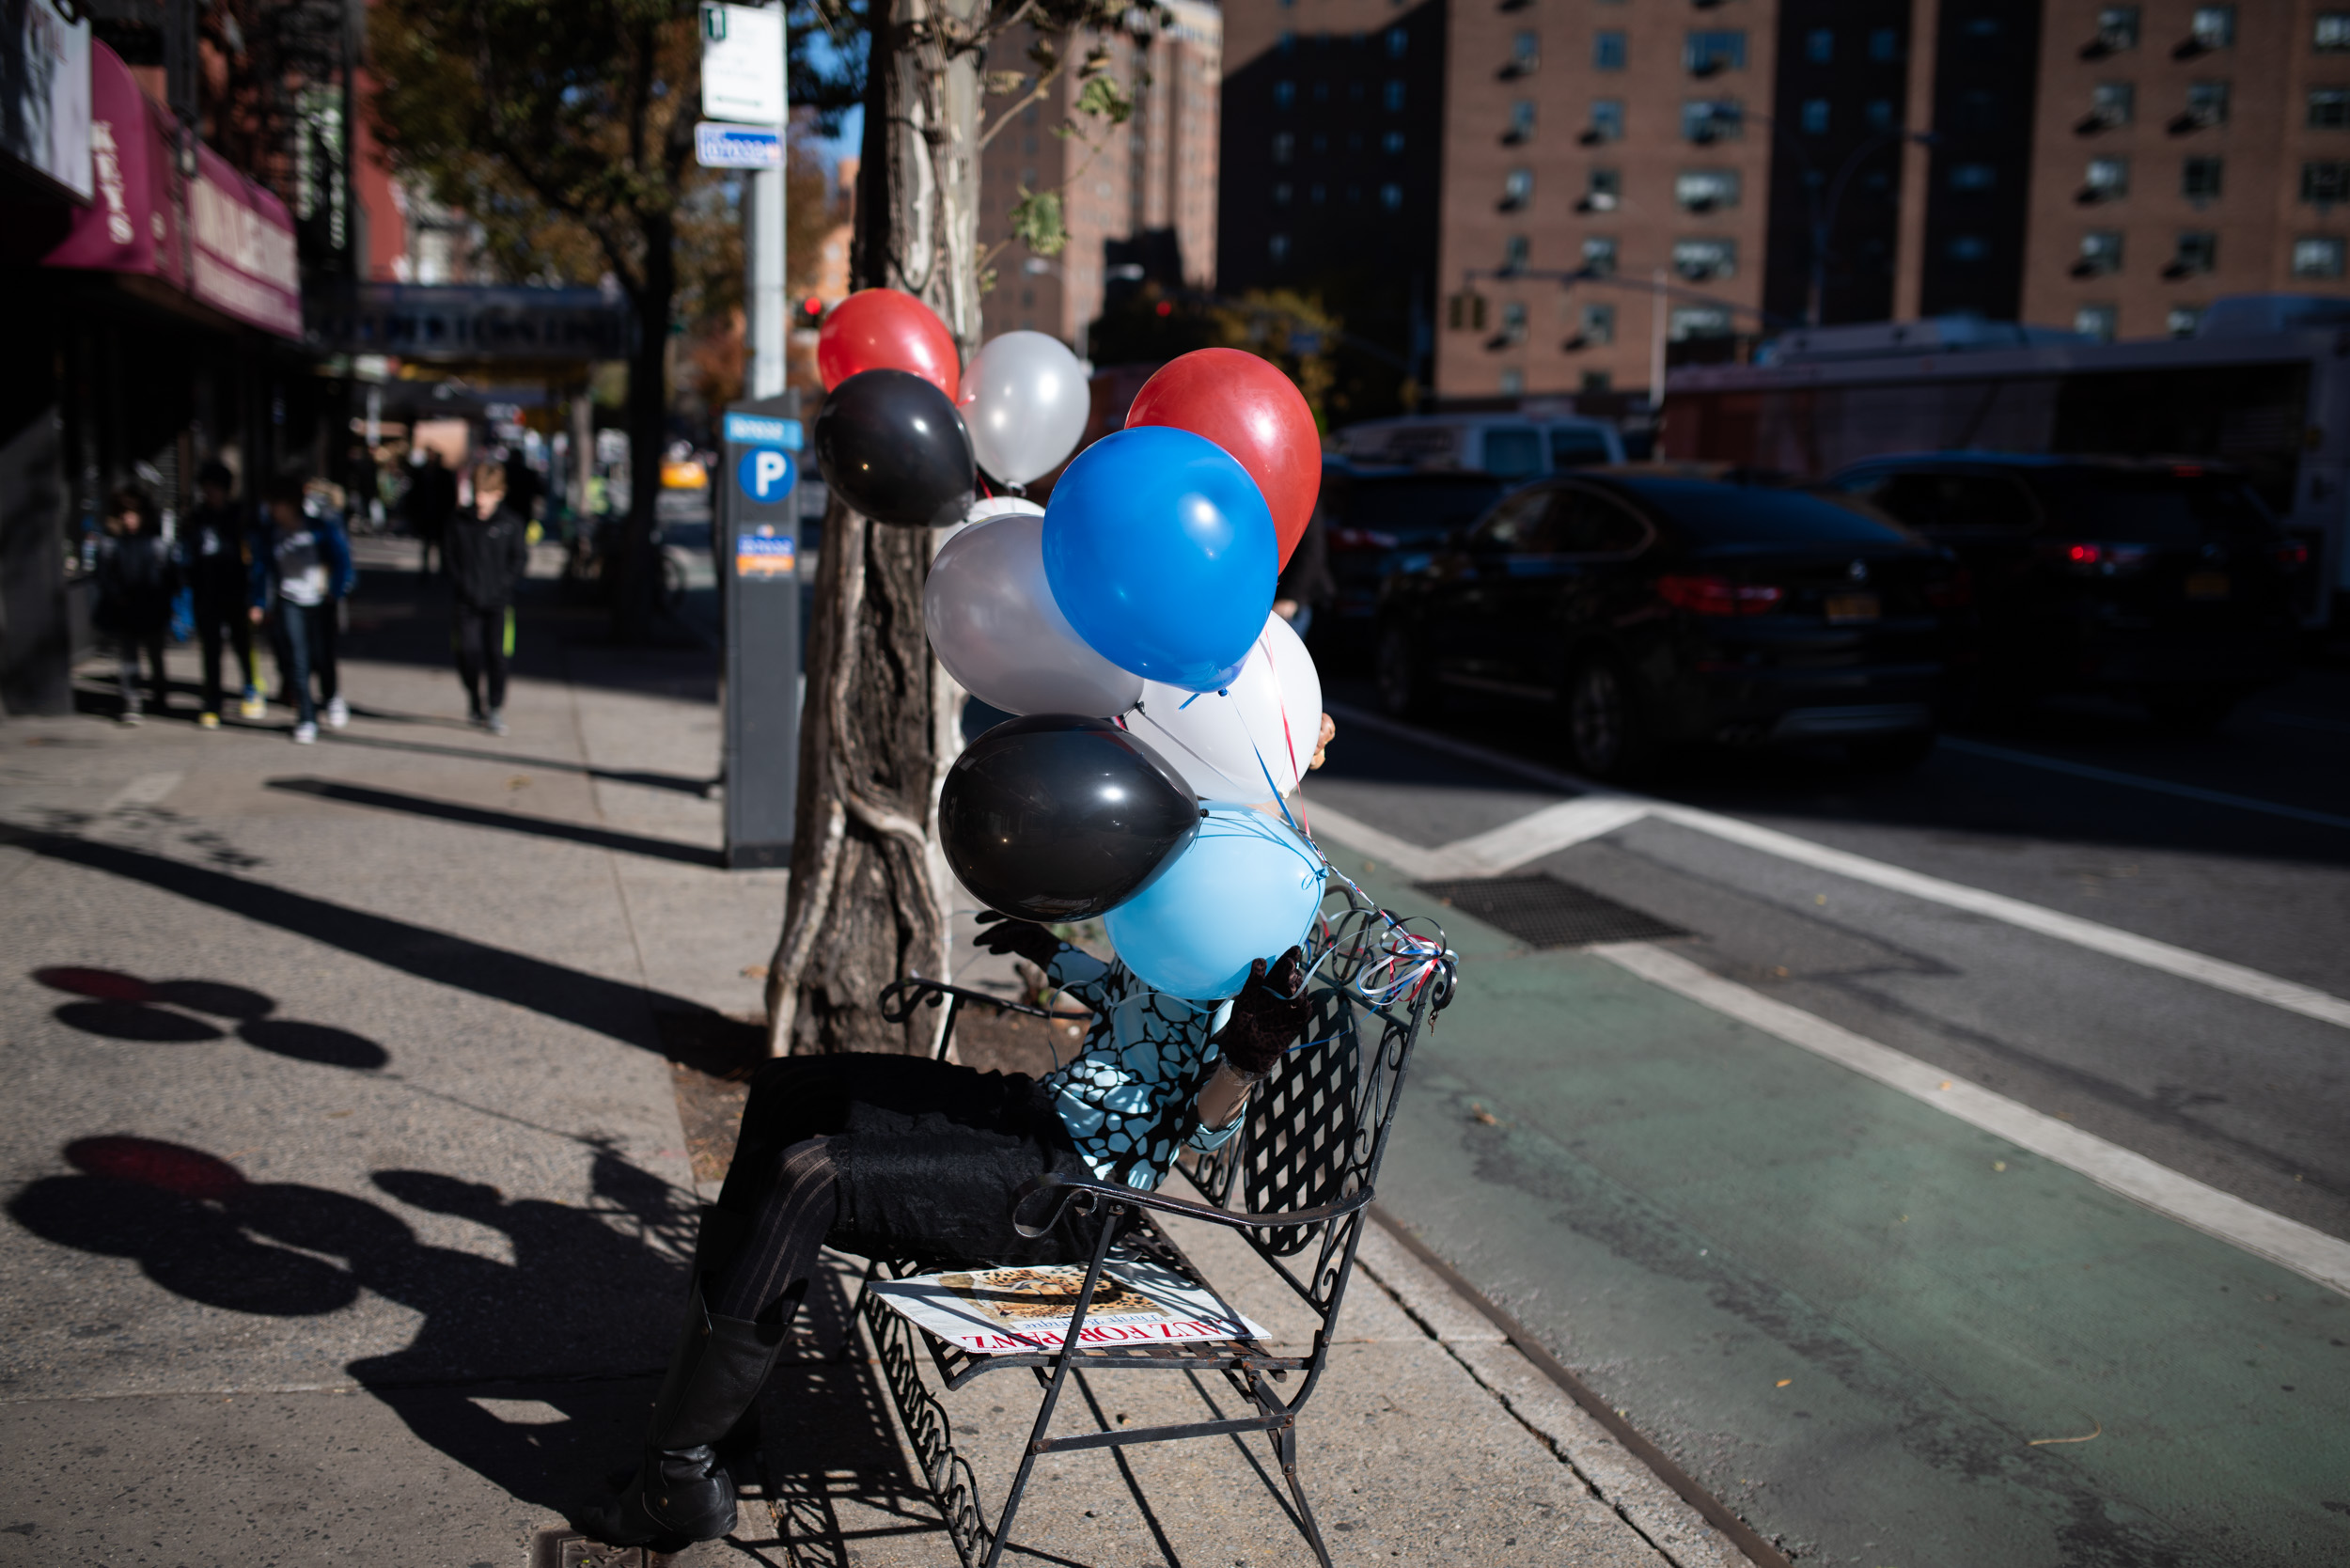 A MAN HOLDING BALLOONS OBSCURES HIS FACE  IN NEW YORK CITY 